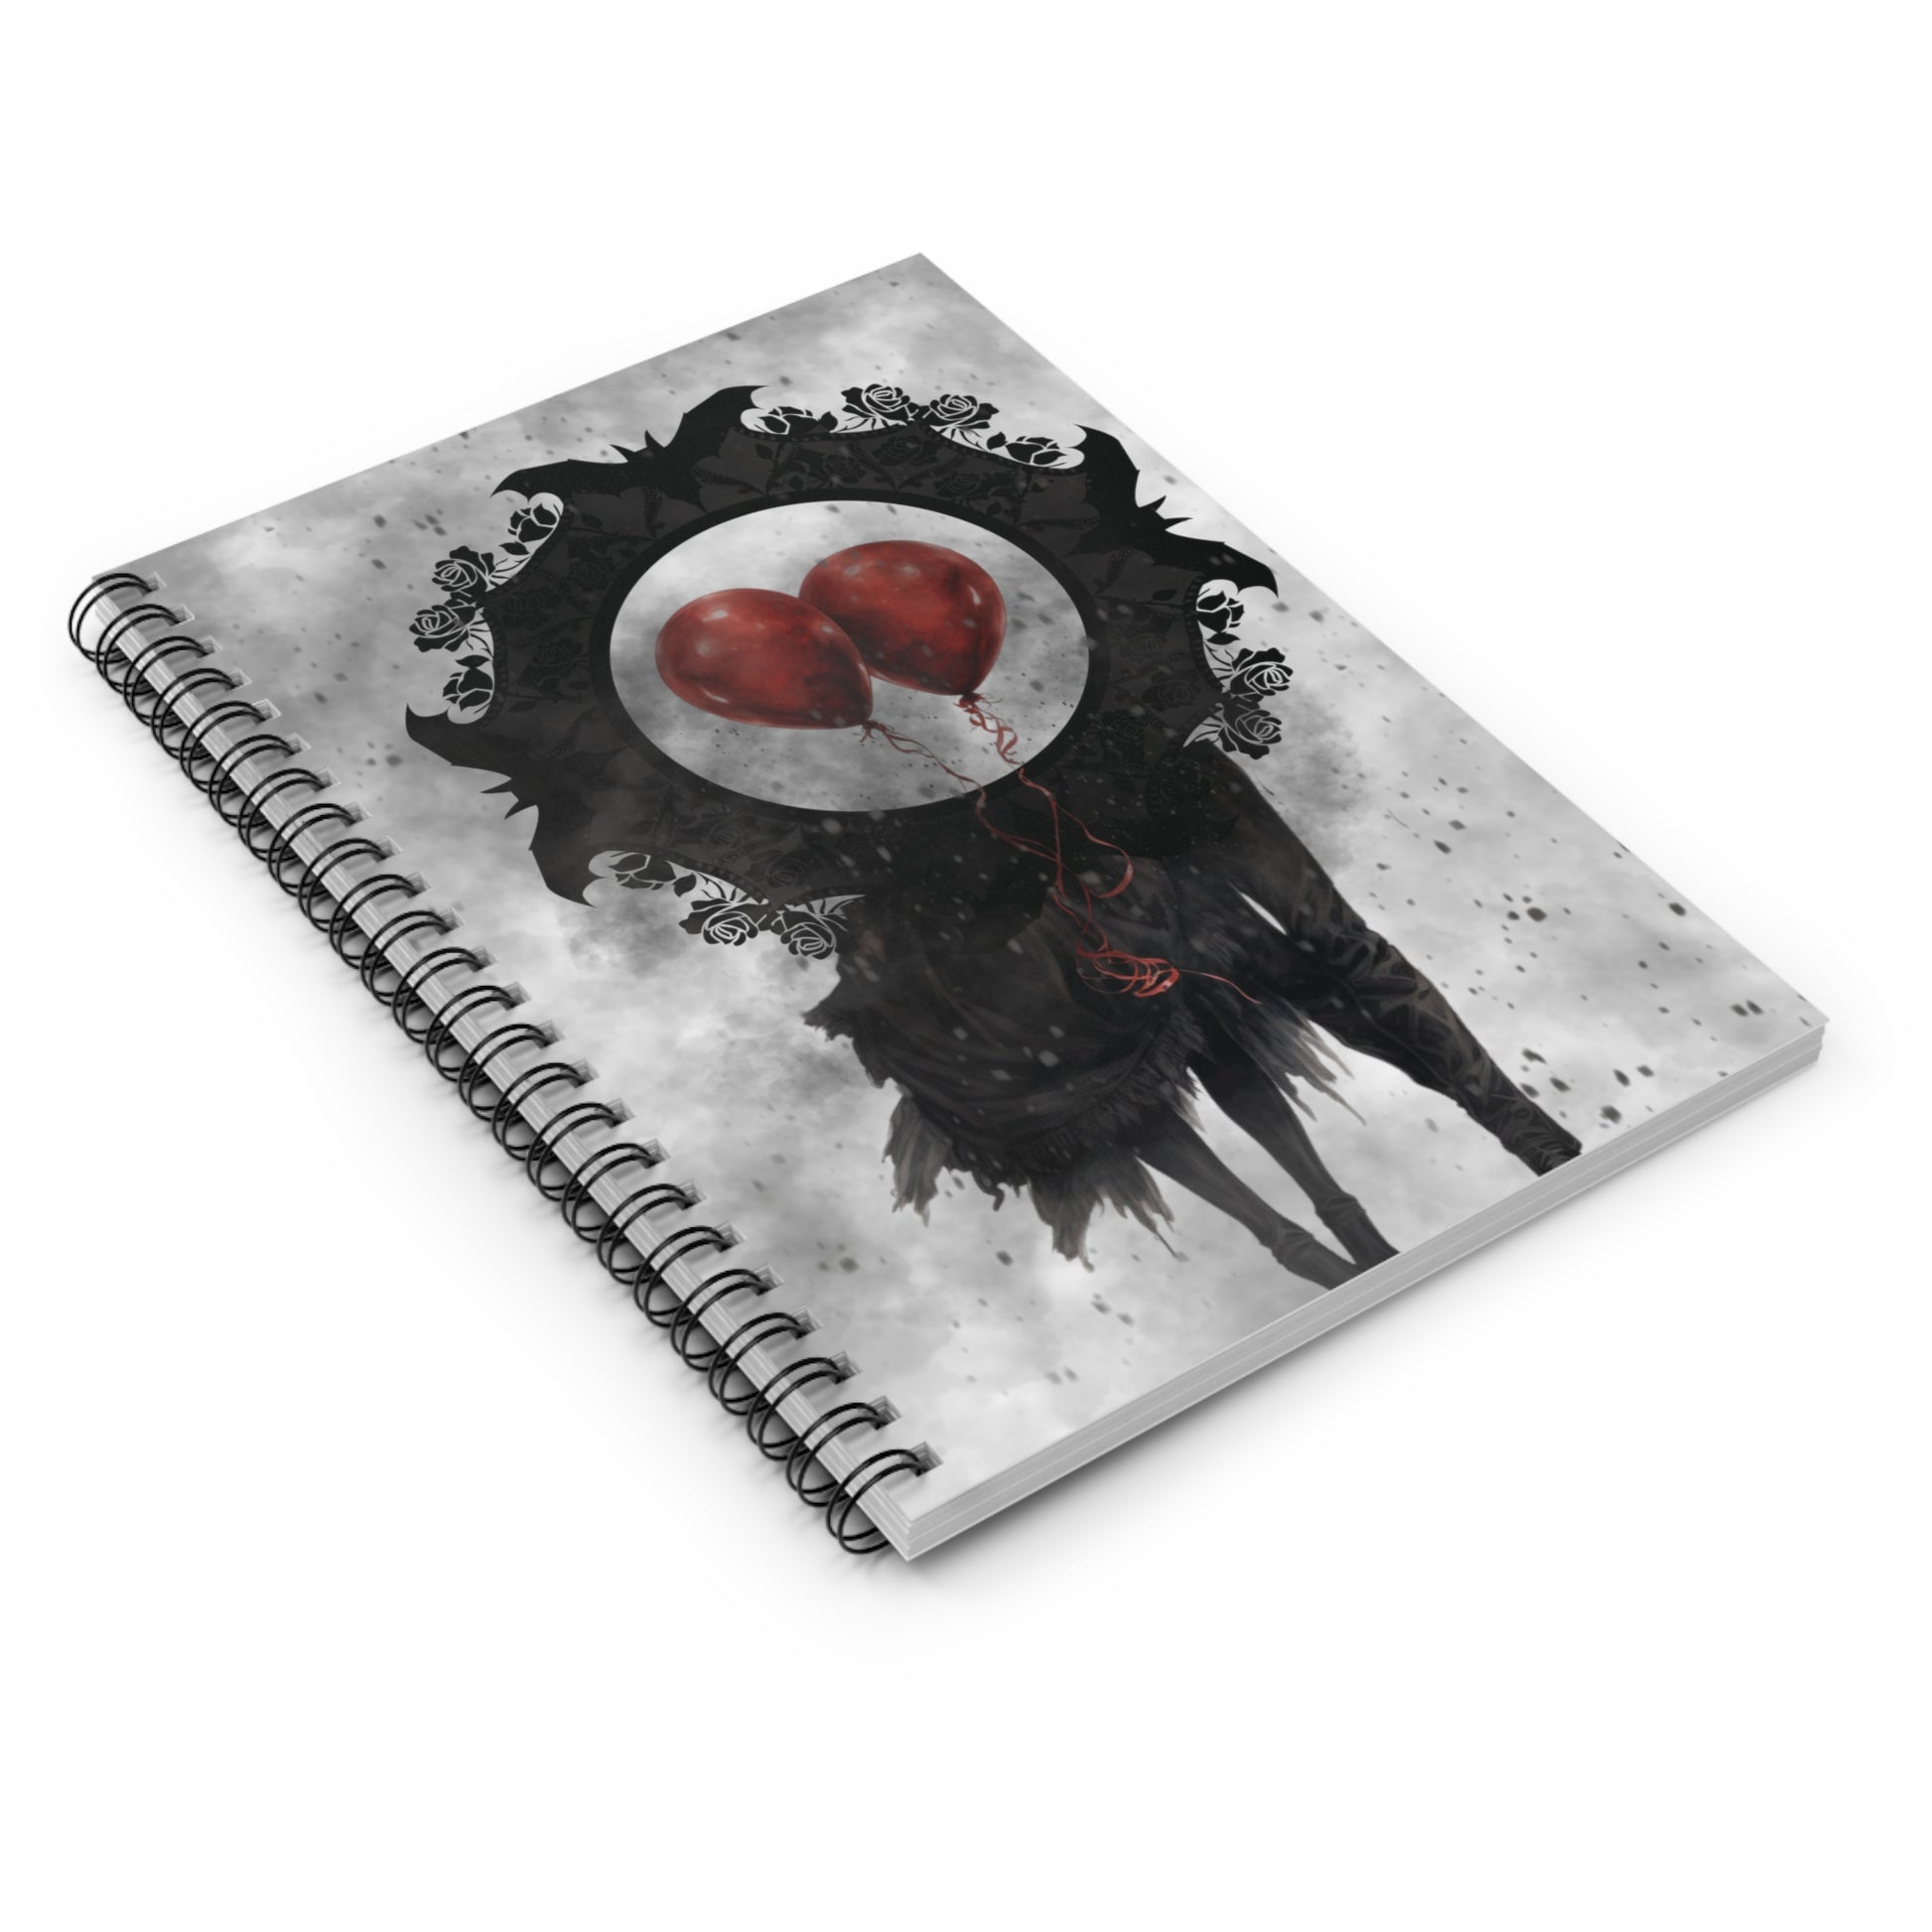 Red Balloon: Spiral Notebook - Log Books - Journals - Diaries - and More Custom Printed by TheGlassyLass